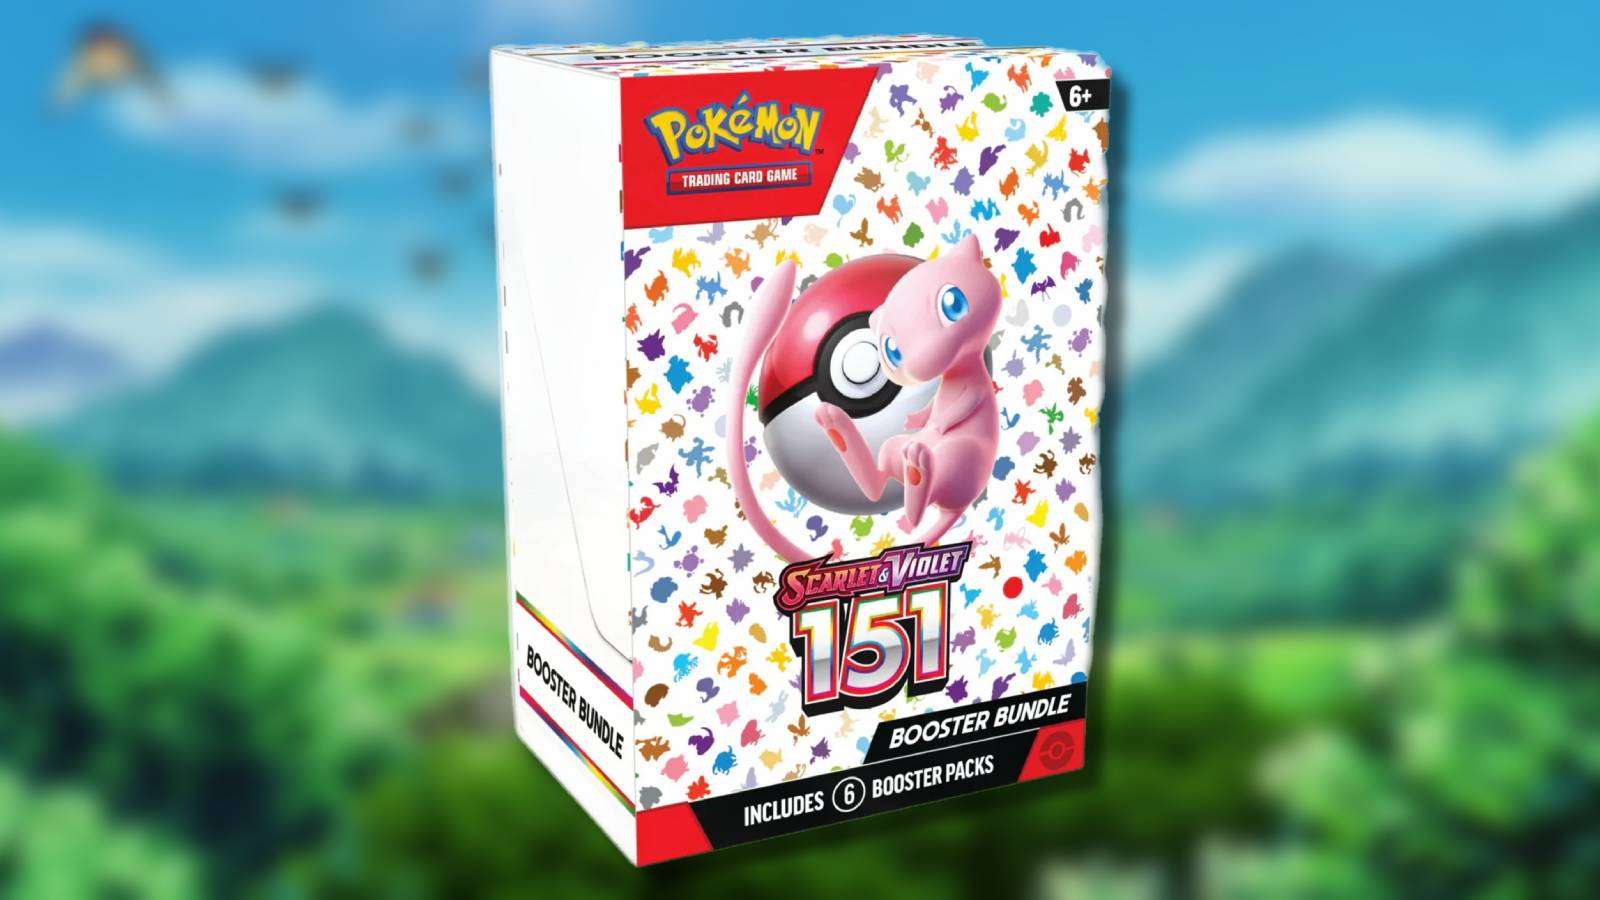 The Pokemon TCG 151 Booster Bundle is shown against a blurred background